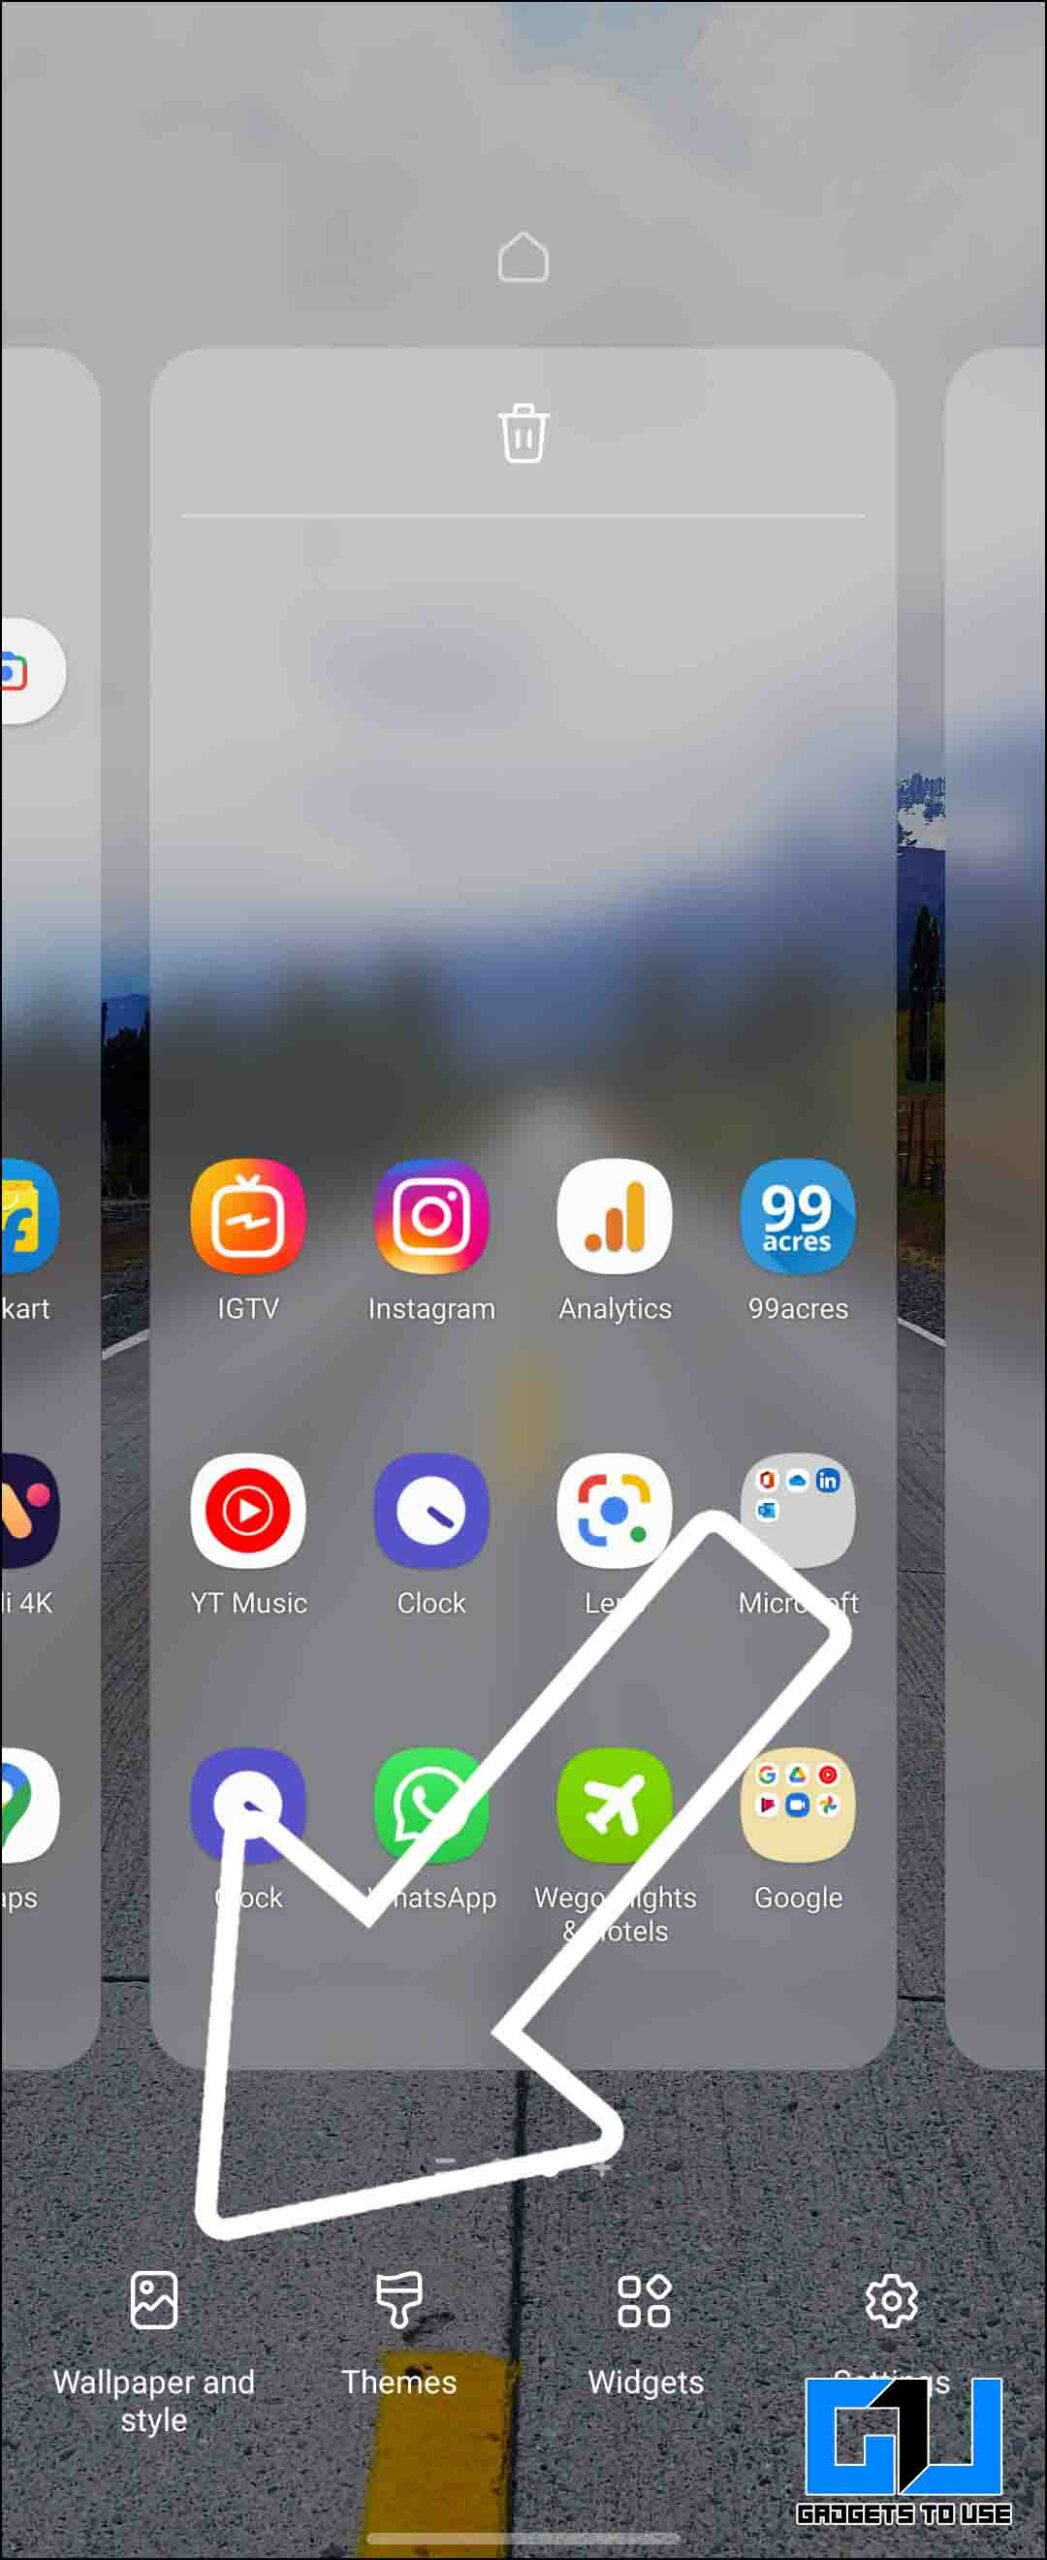 How to Apply Android 12 Material UI Theme, Wallpaper on Any Samsung Phone